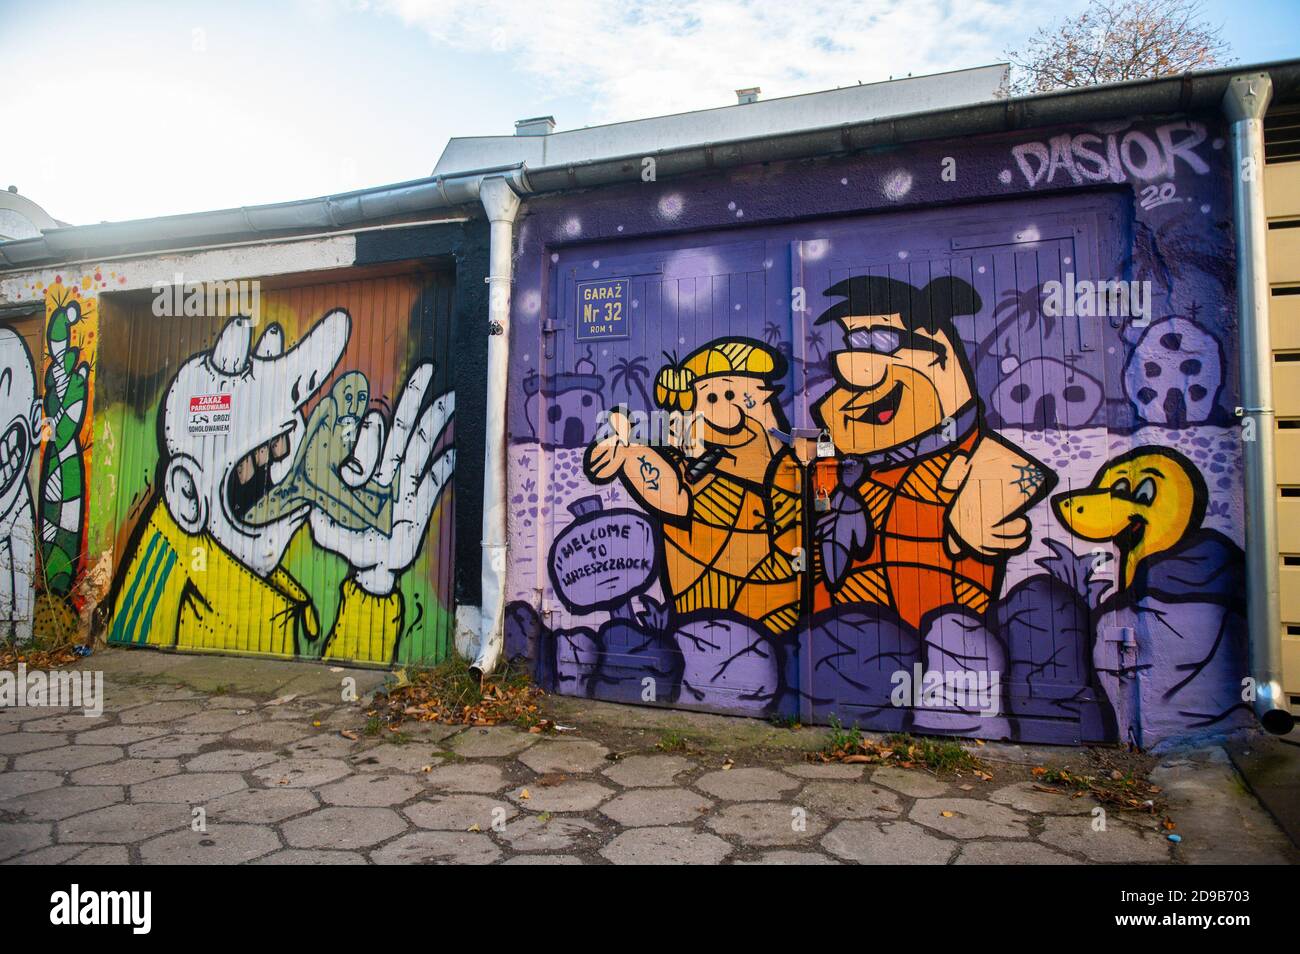 Graffiti mural of Flintstones cartoon seen in Gdansk Wrzeszcz. Murals are very popular in large Polish cities and are a kind of art. Stock Photo